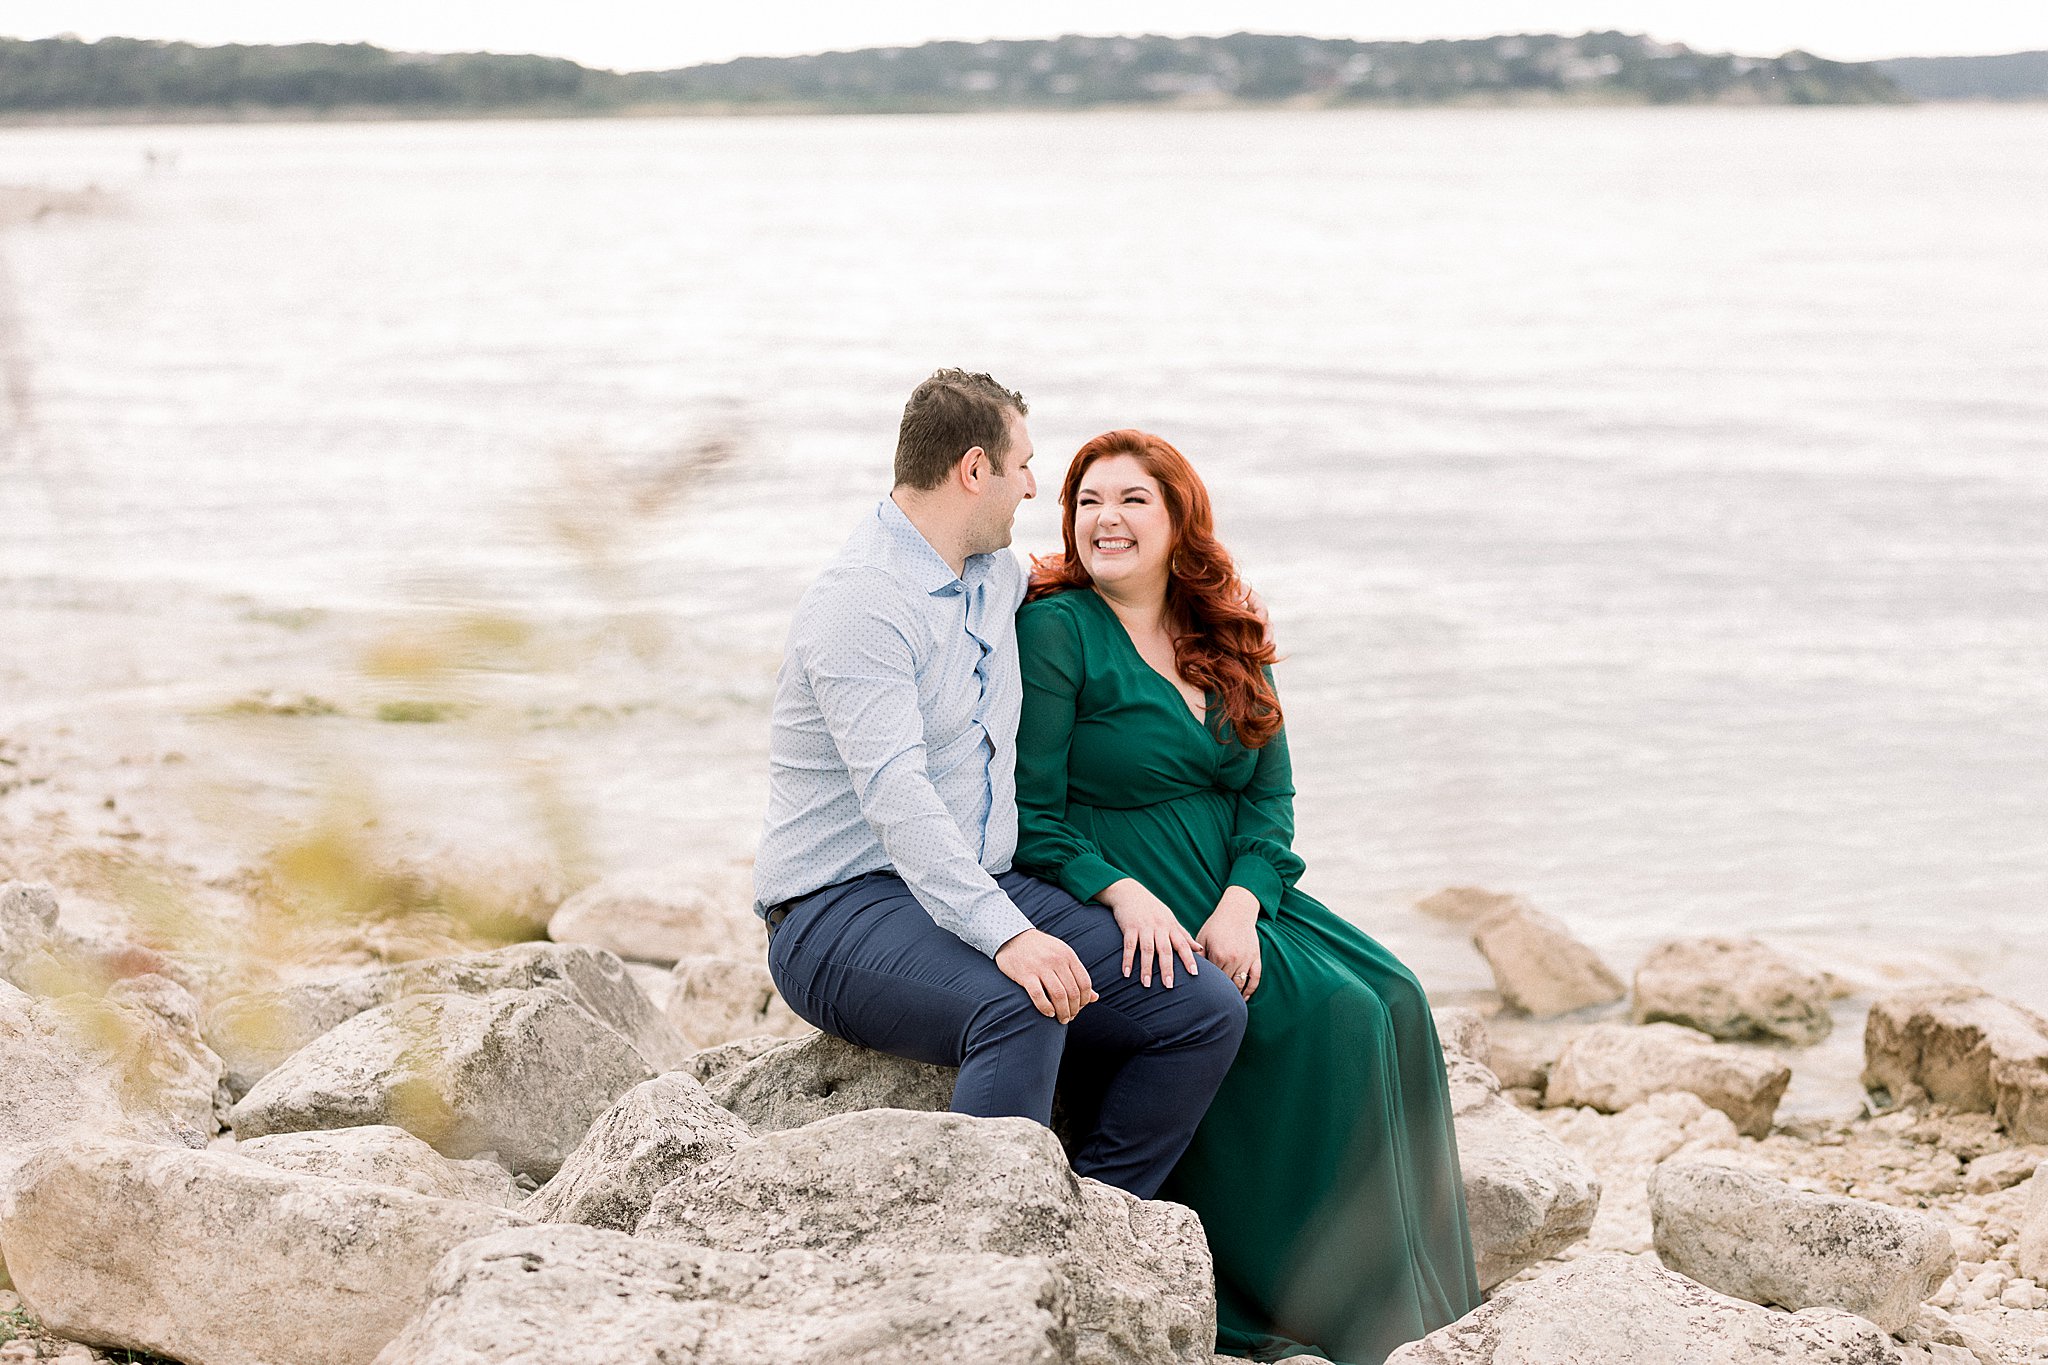 Overlook Park Engagement Session by Anna Kay Photography, Hill Country Wedding Photographer